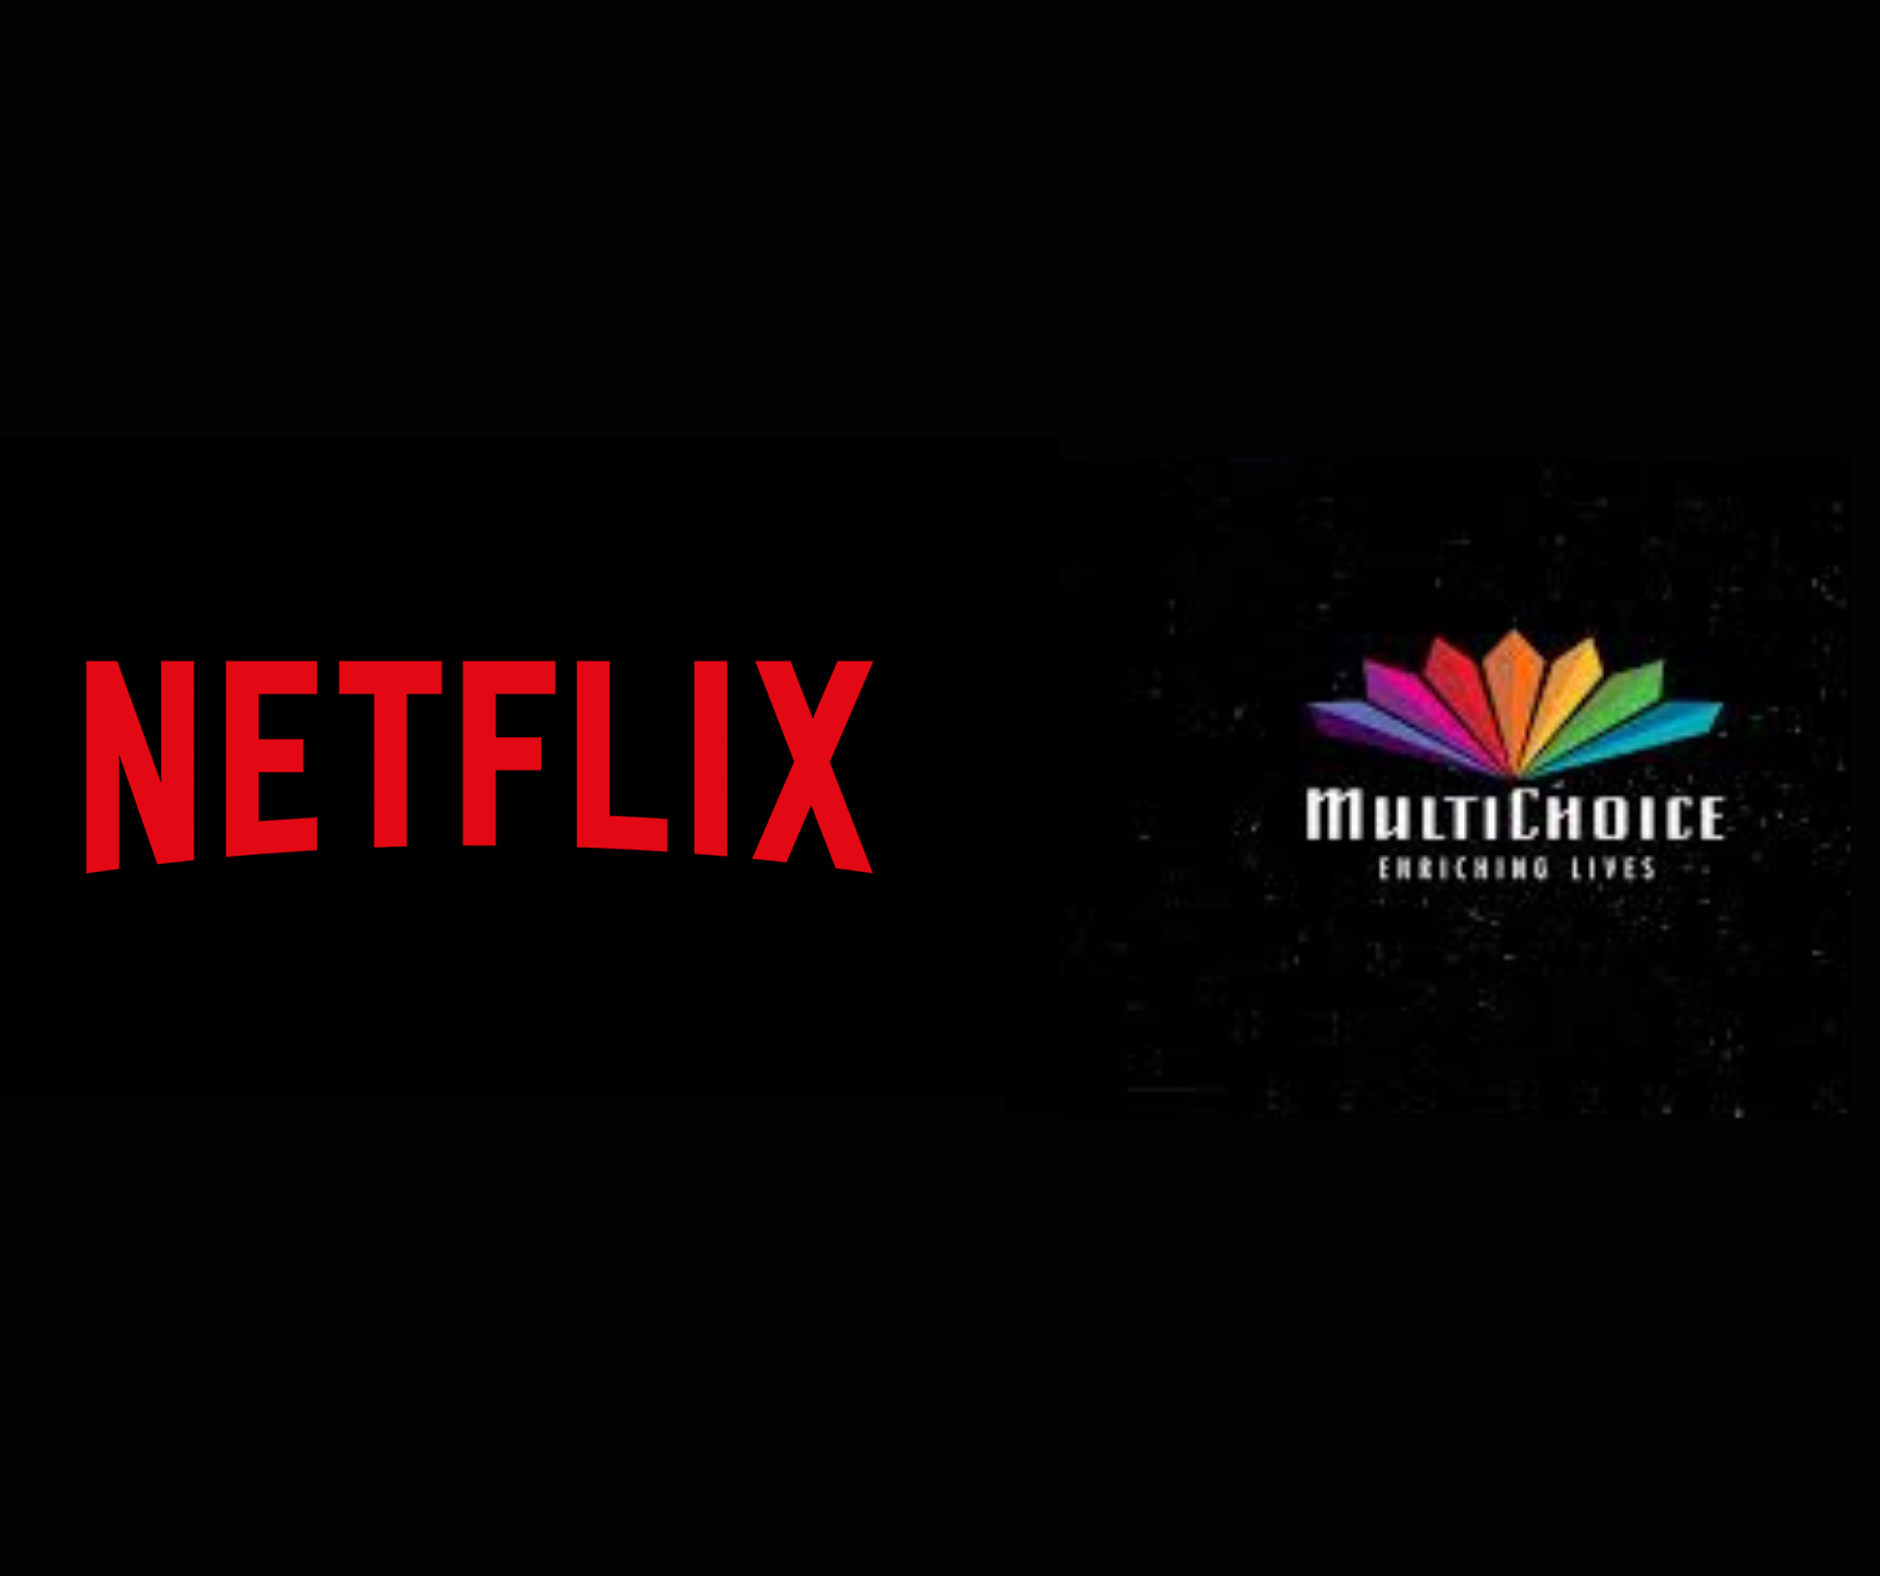 What Multichoice and Netflix’s rivalry mean for Africa